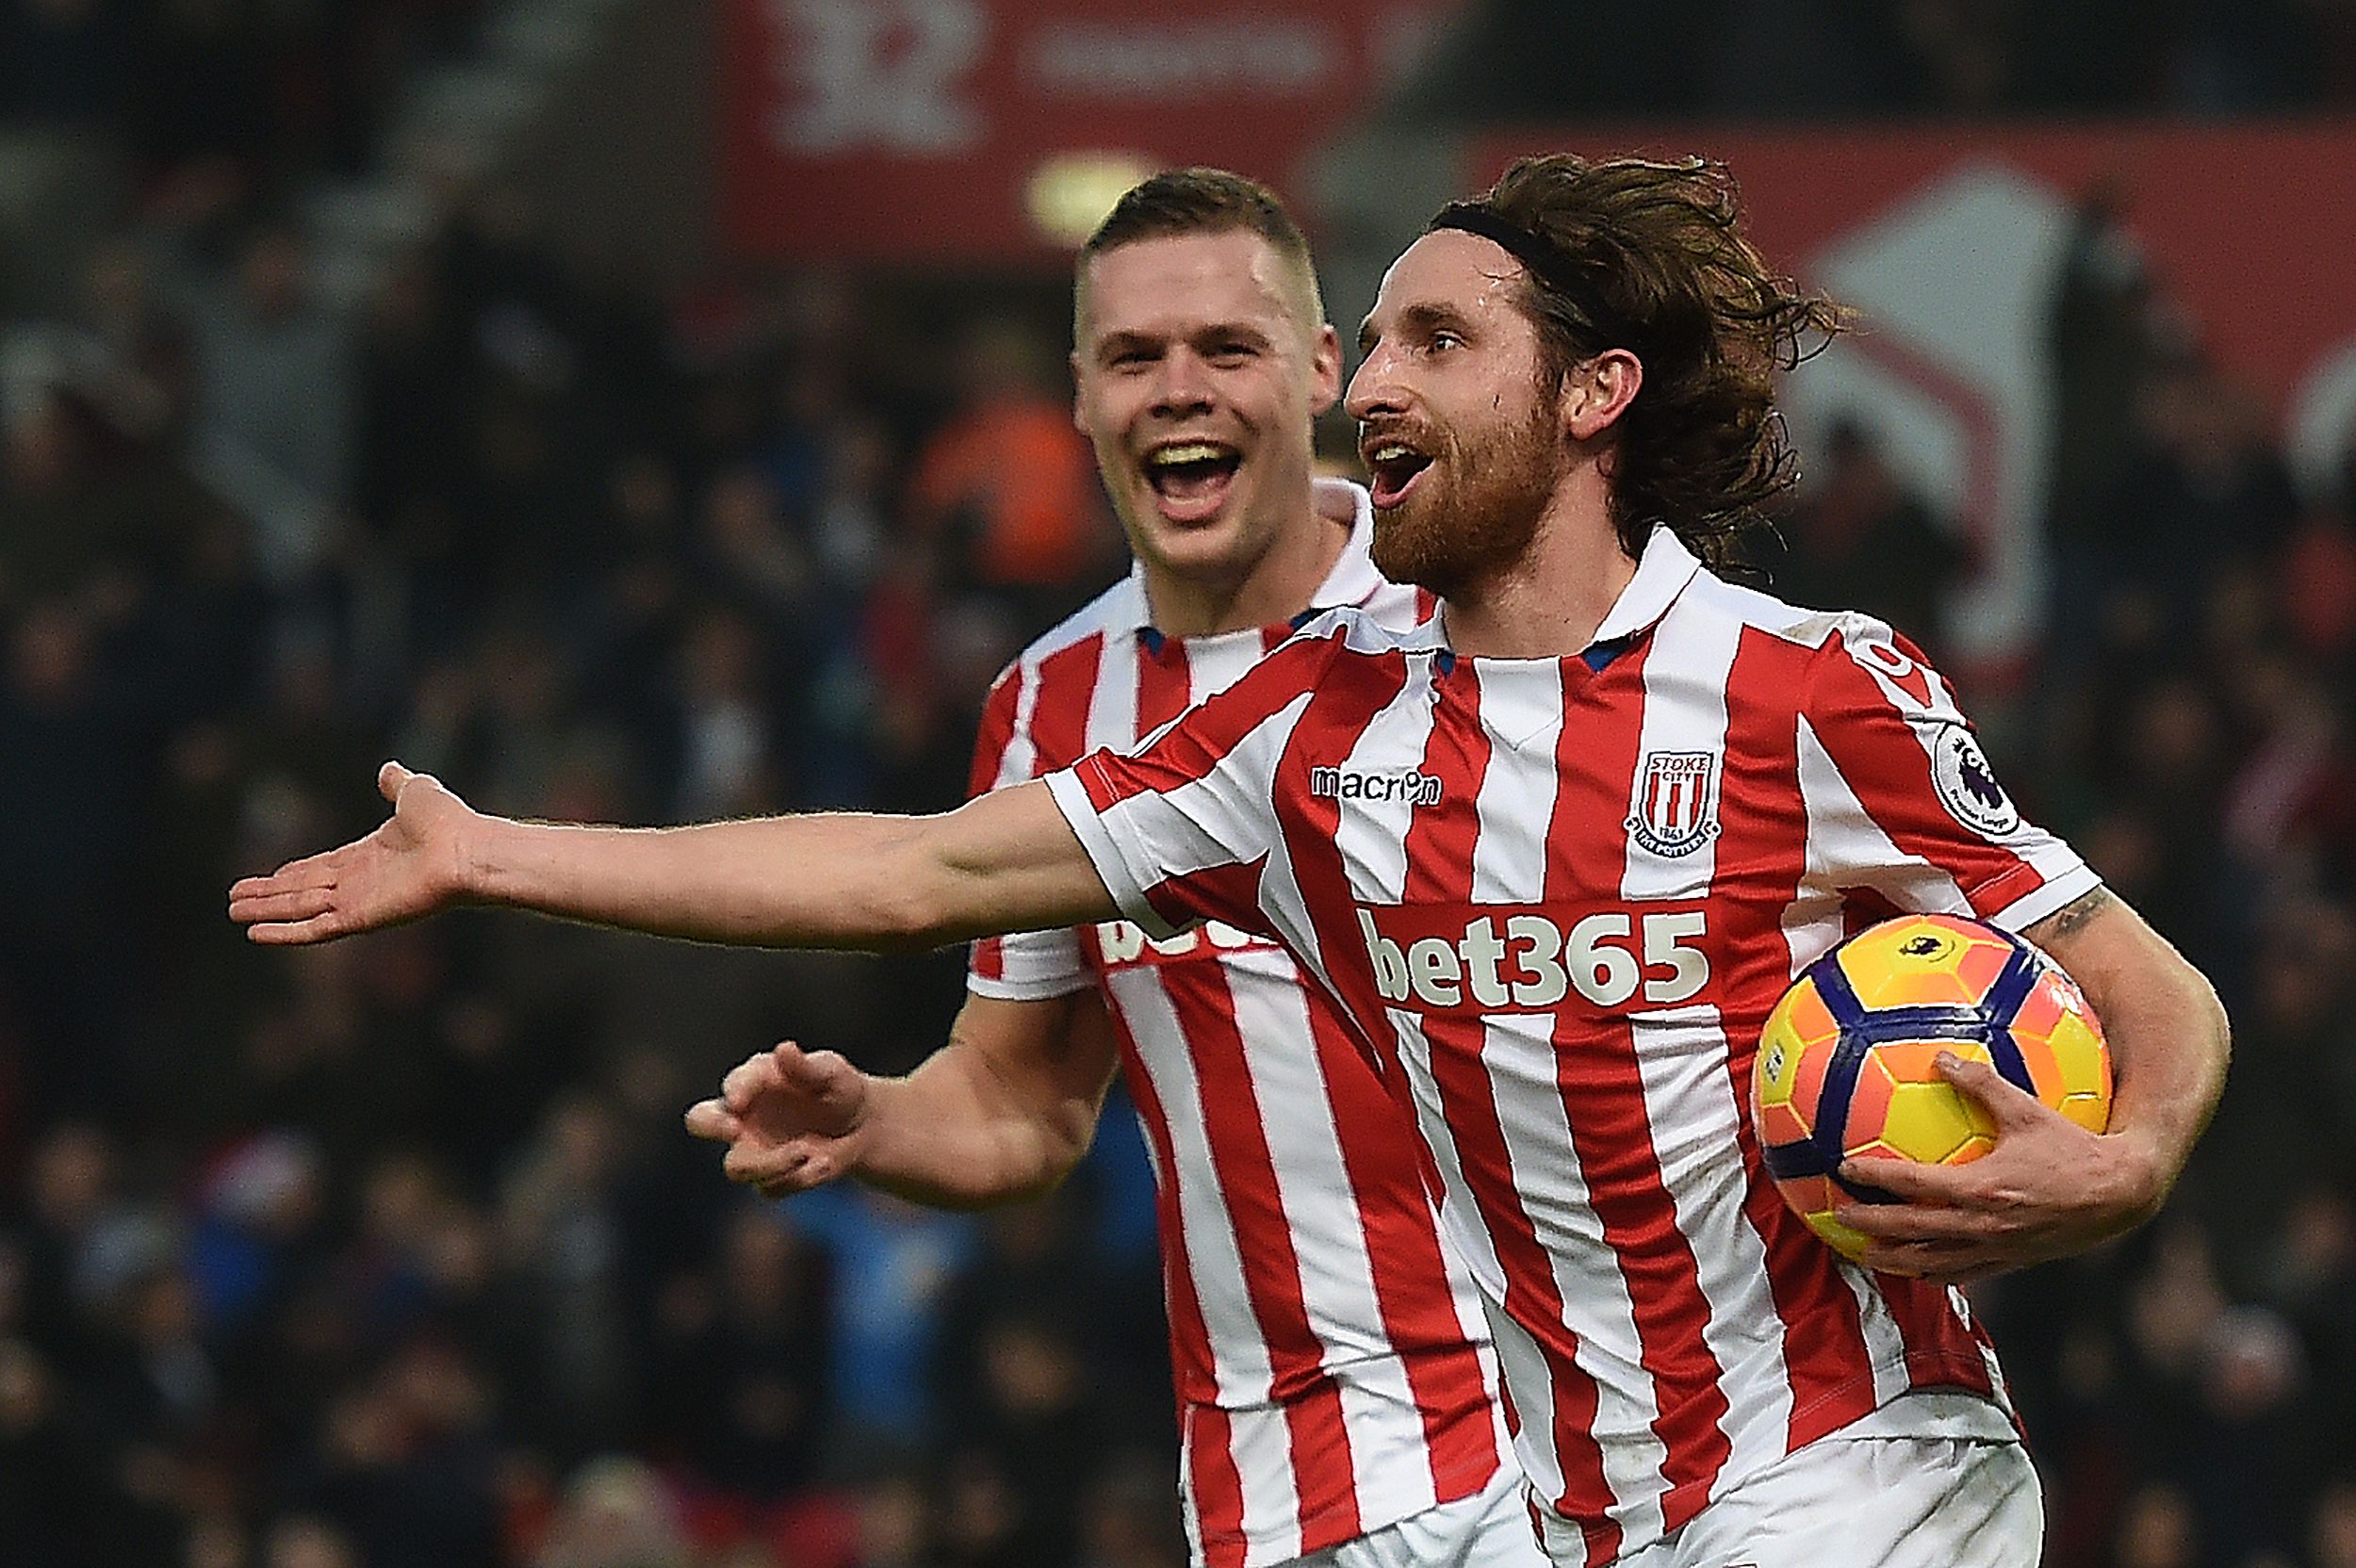 Stoke City's Welsh midfielder Joe Allen (R) celebrates scoring his team's second goal during the English Premier League football match between Stoke City and Leicester City at the Bet365 Stadium in Stoke-on-Trent, central England on December 17, 2016. / AFP / Paul ELLIS / RESTRICTED TO EDITORIAL USE. No use with unauthorized audio, video, data, fixture lists, club/league logos or 'live' services. Online in-match use limited to 75 images, no video emulation. No use in betting, games or single club/league/player publications.  /         (Photo credit should read PAUL ELLIS/AFP/Getty Images)